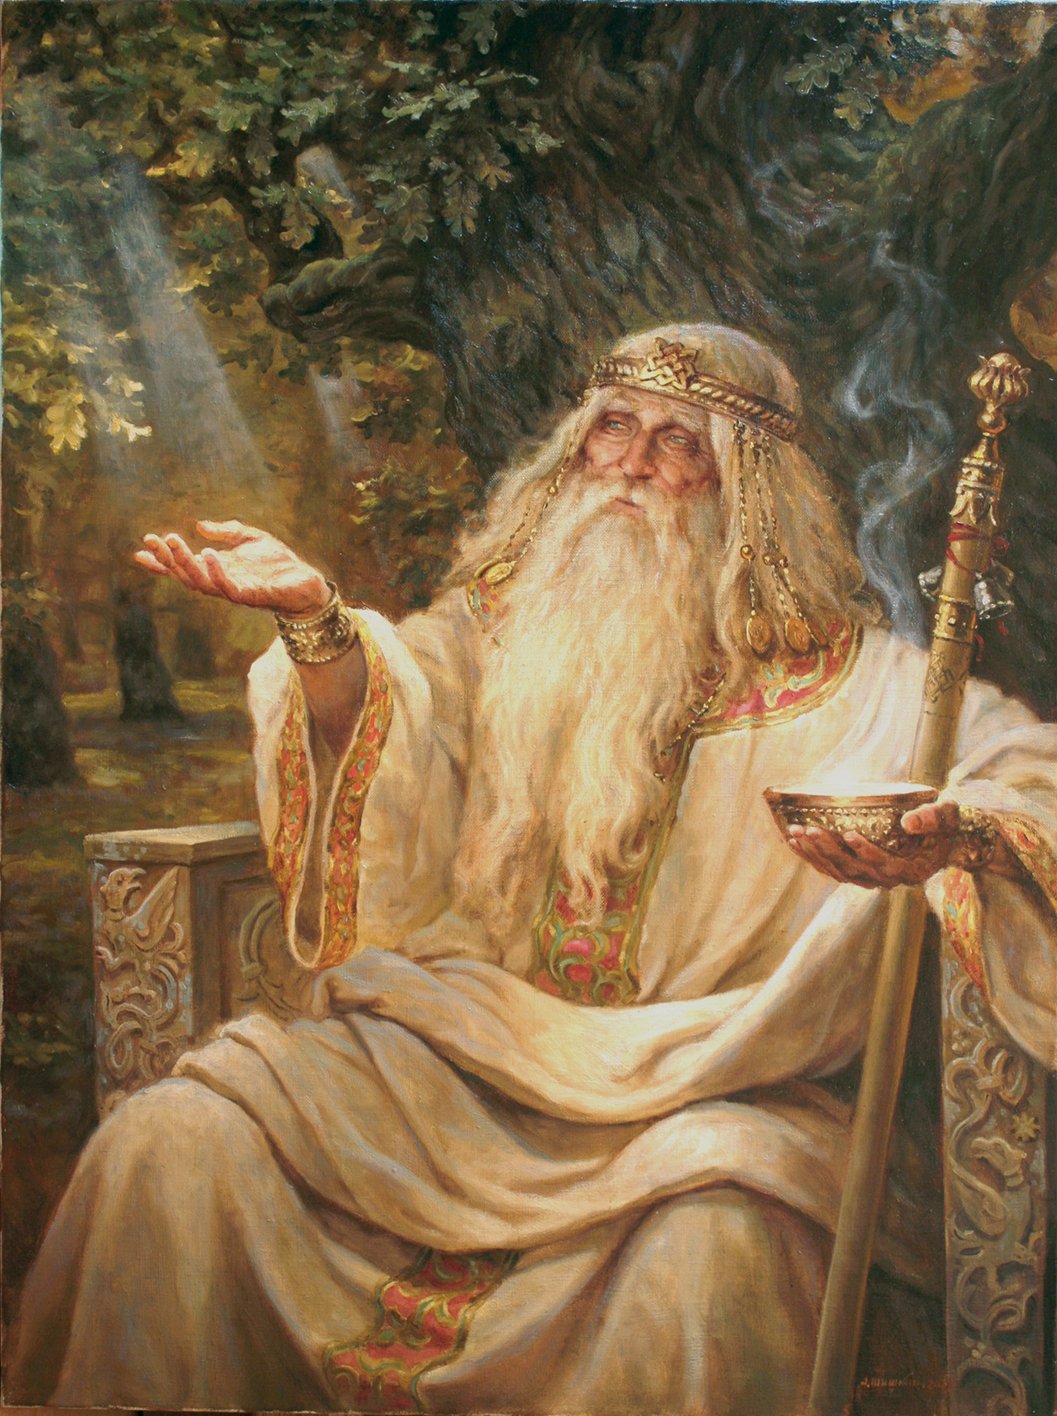 The Slavic deity Belobog sitting in a golden throne and holding a smoking cup. A ray of light is shining on his hand.